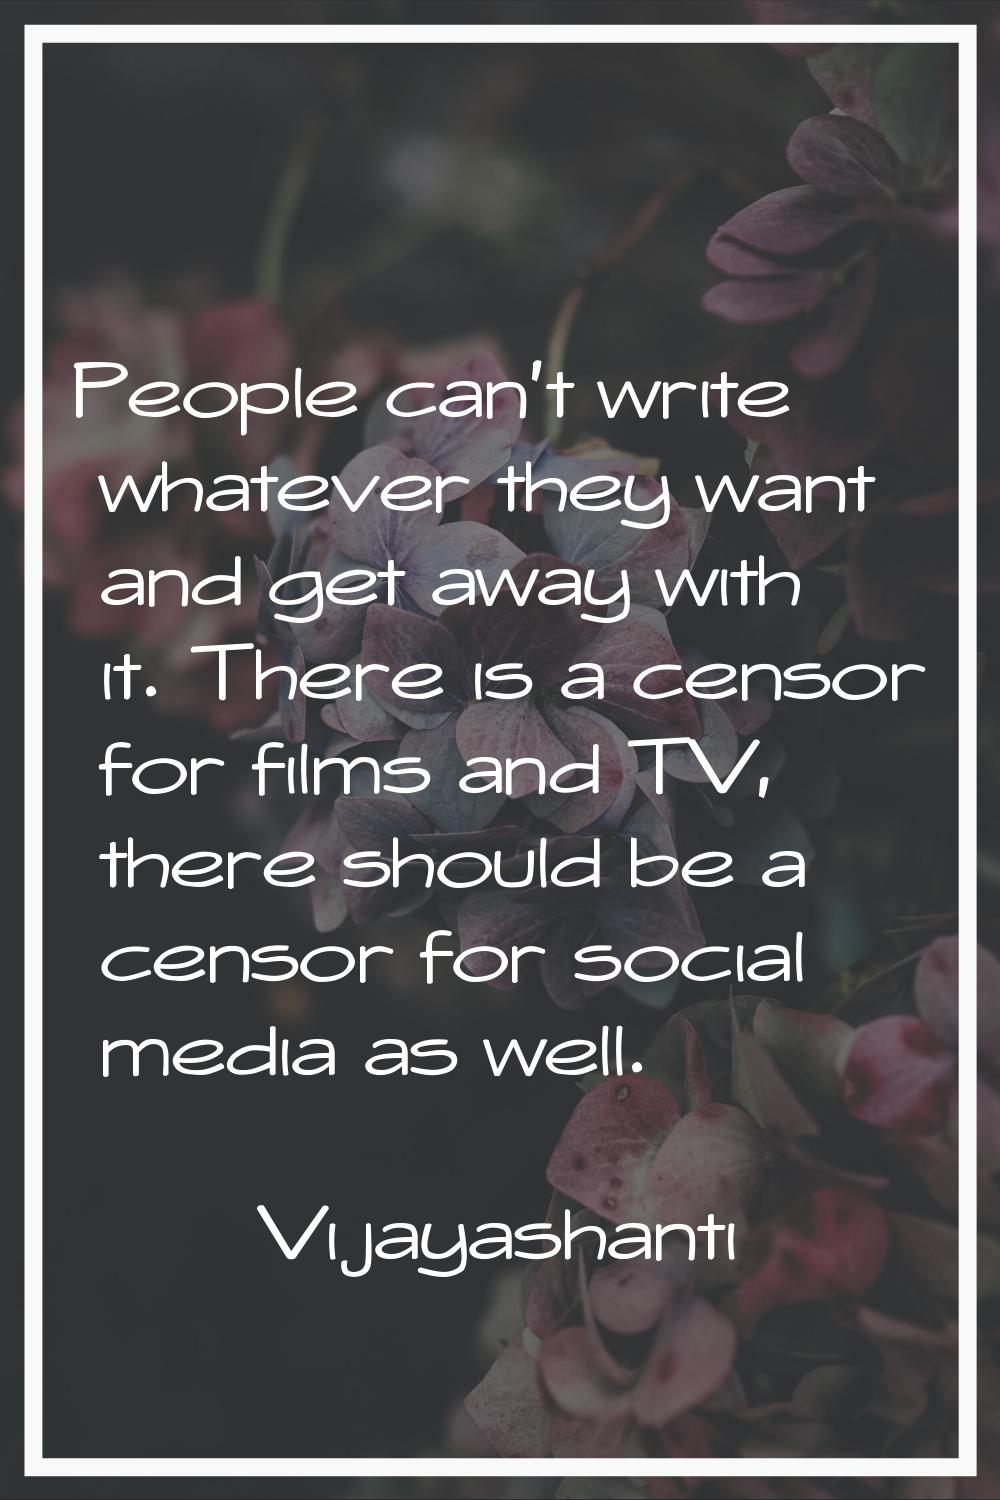 People can't write whatever they want and get away with it. There is a censor for films and TV, the